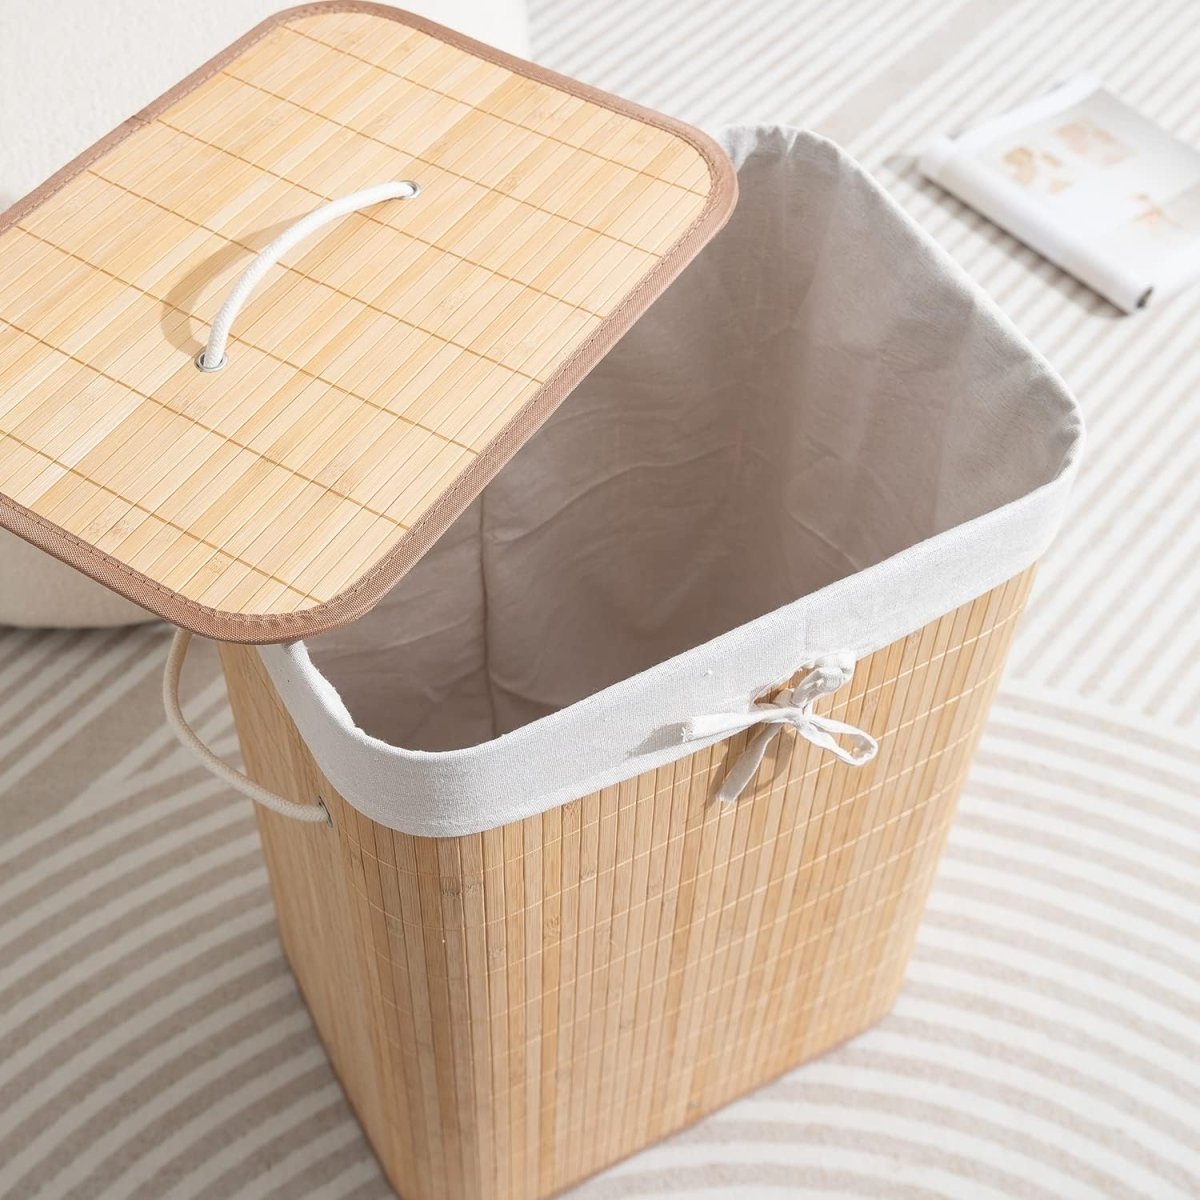 Bamboo Laundry Basket With Lid (Light Brown) (40CM*30CM*60CM) Laundry Bag- Royalkart - The Urban Store